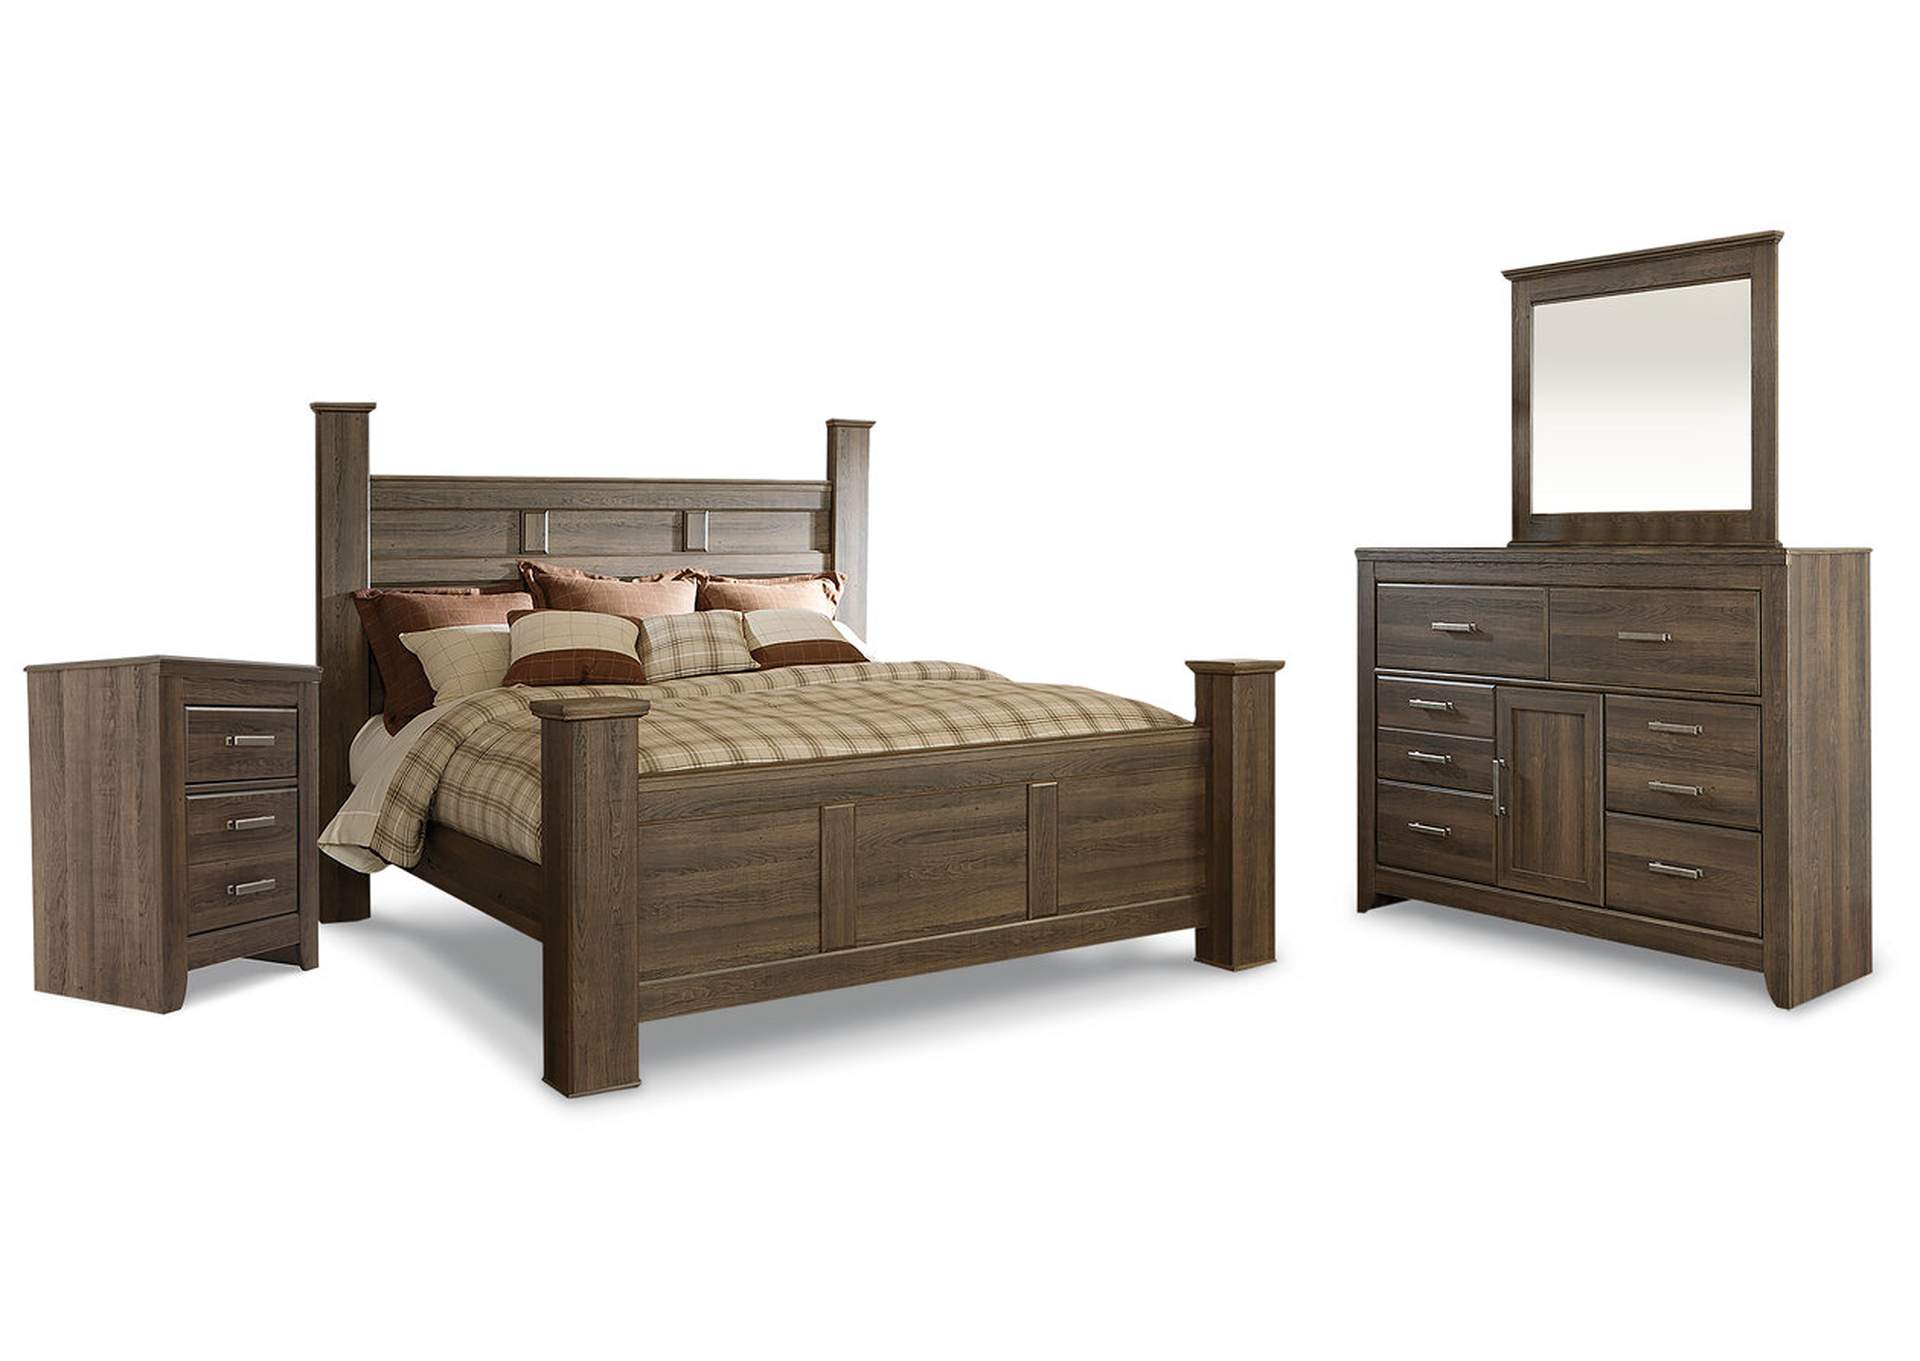 Juararo King Poster Bed, Dresser, Mirror and Nightstand,Signature Design By Ashley